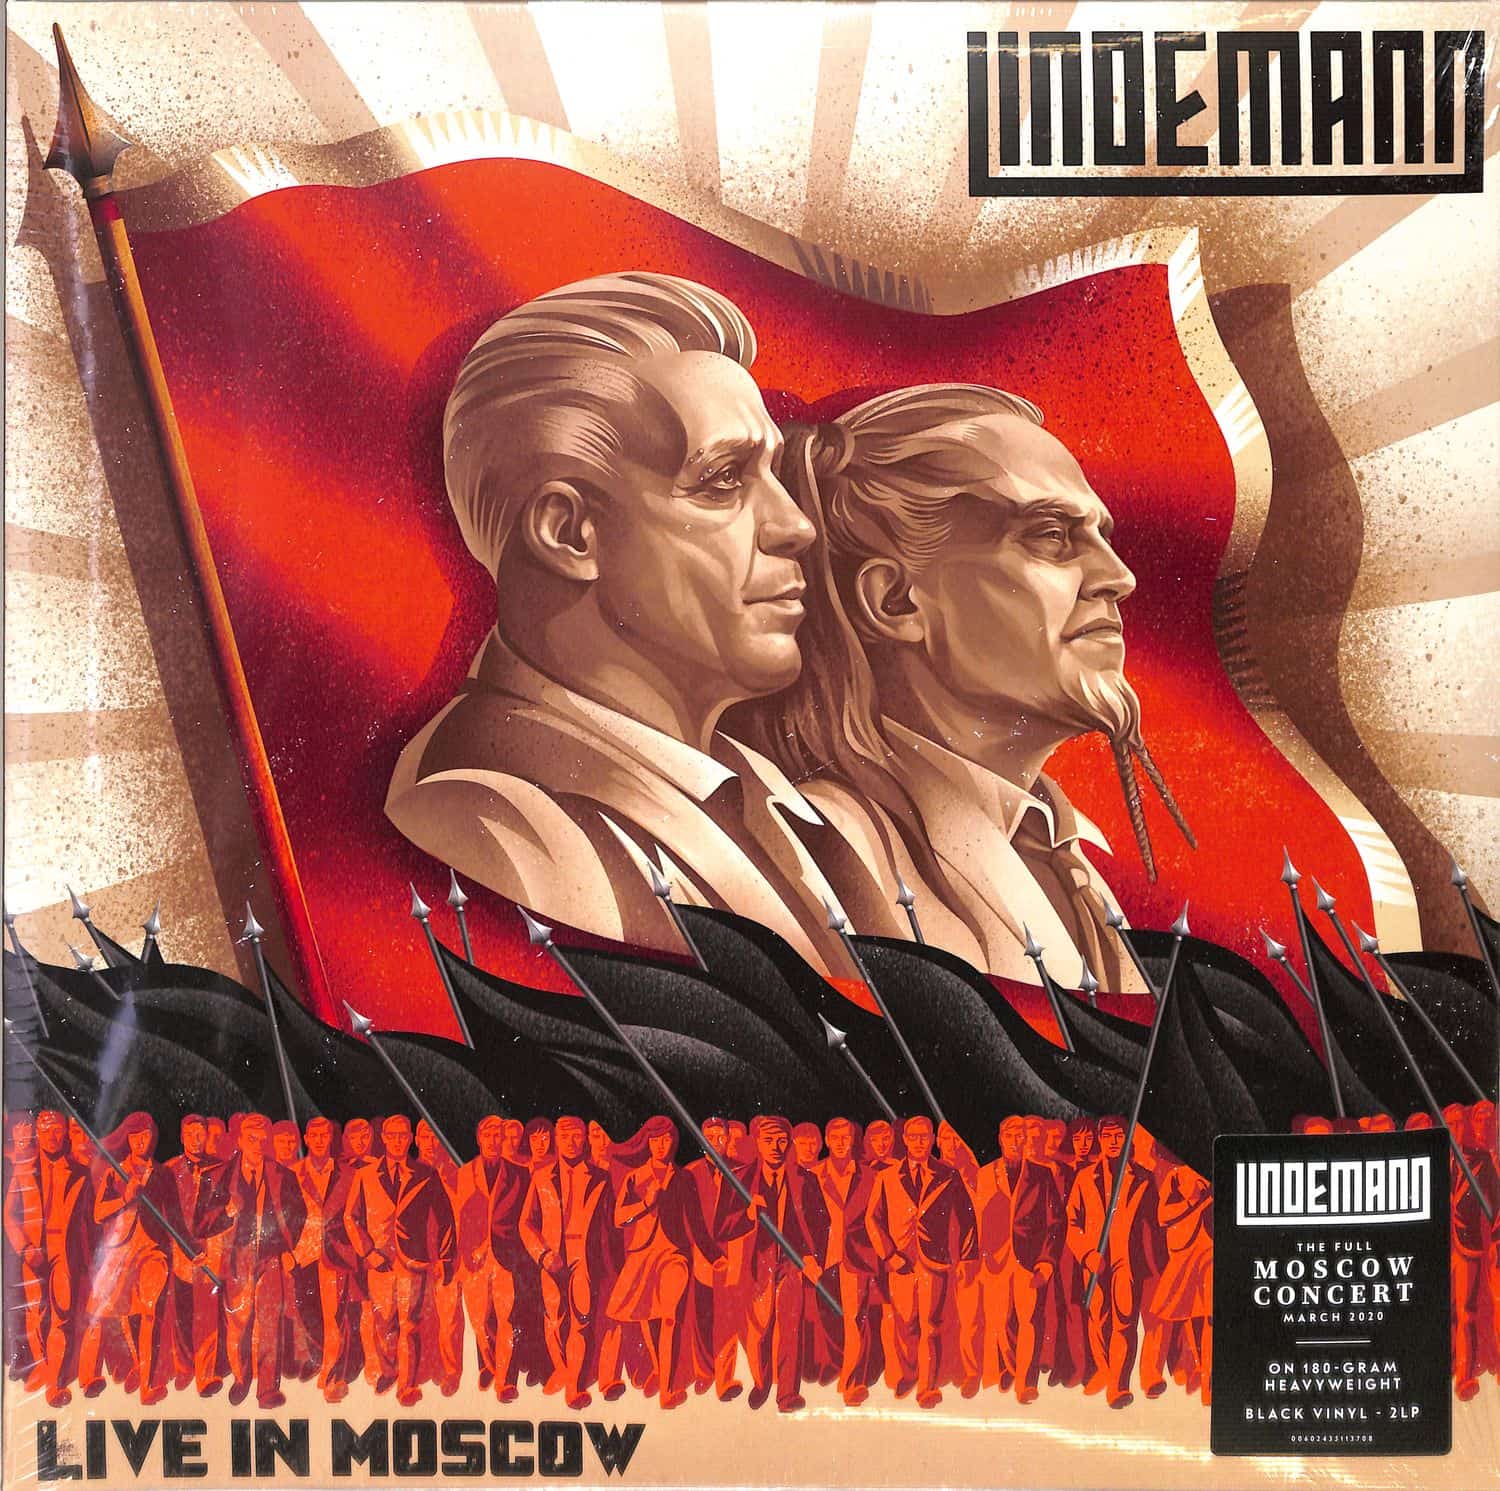 Lindemann - LIVE IN MOSCOW 